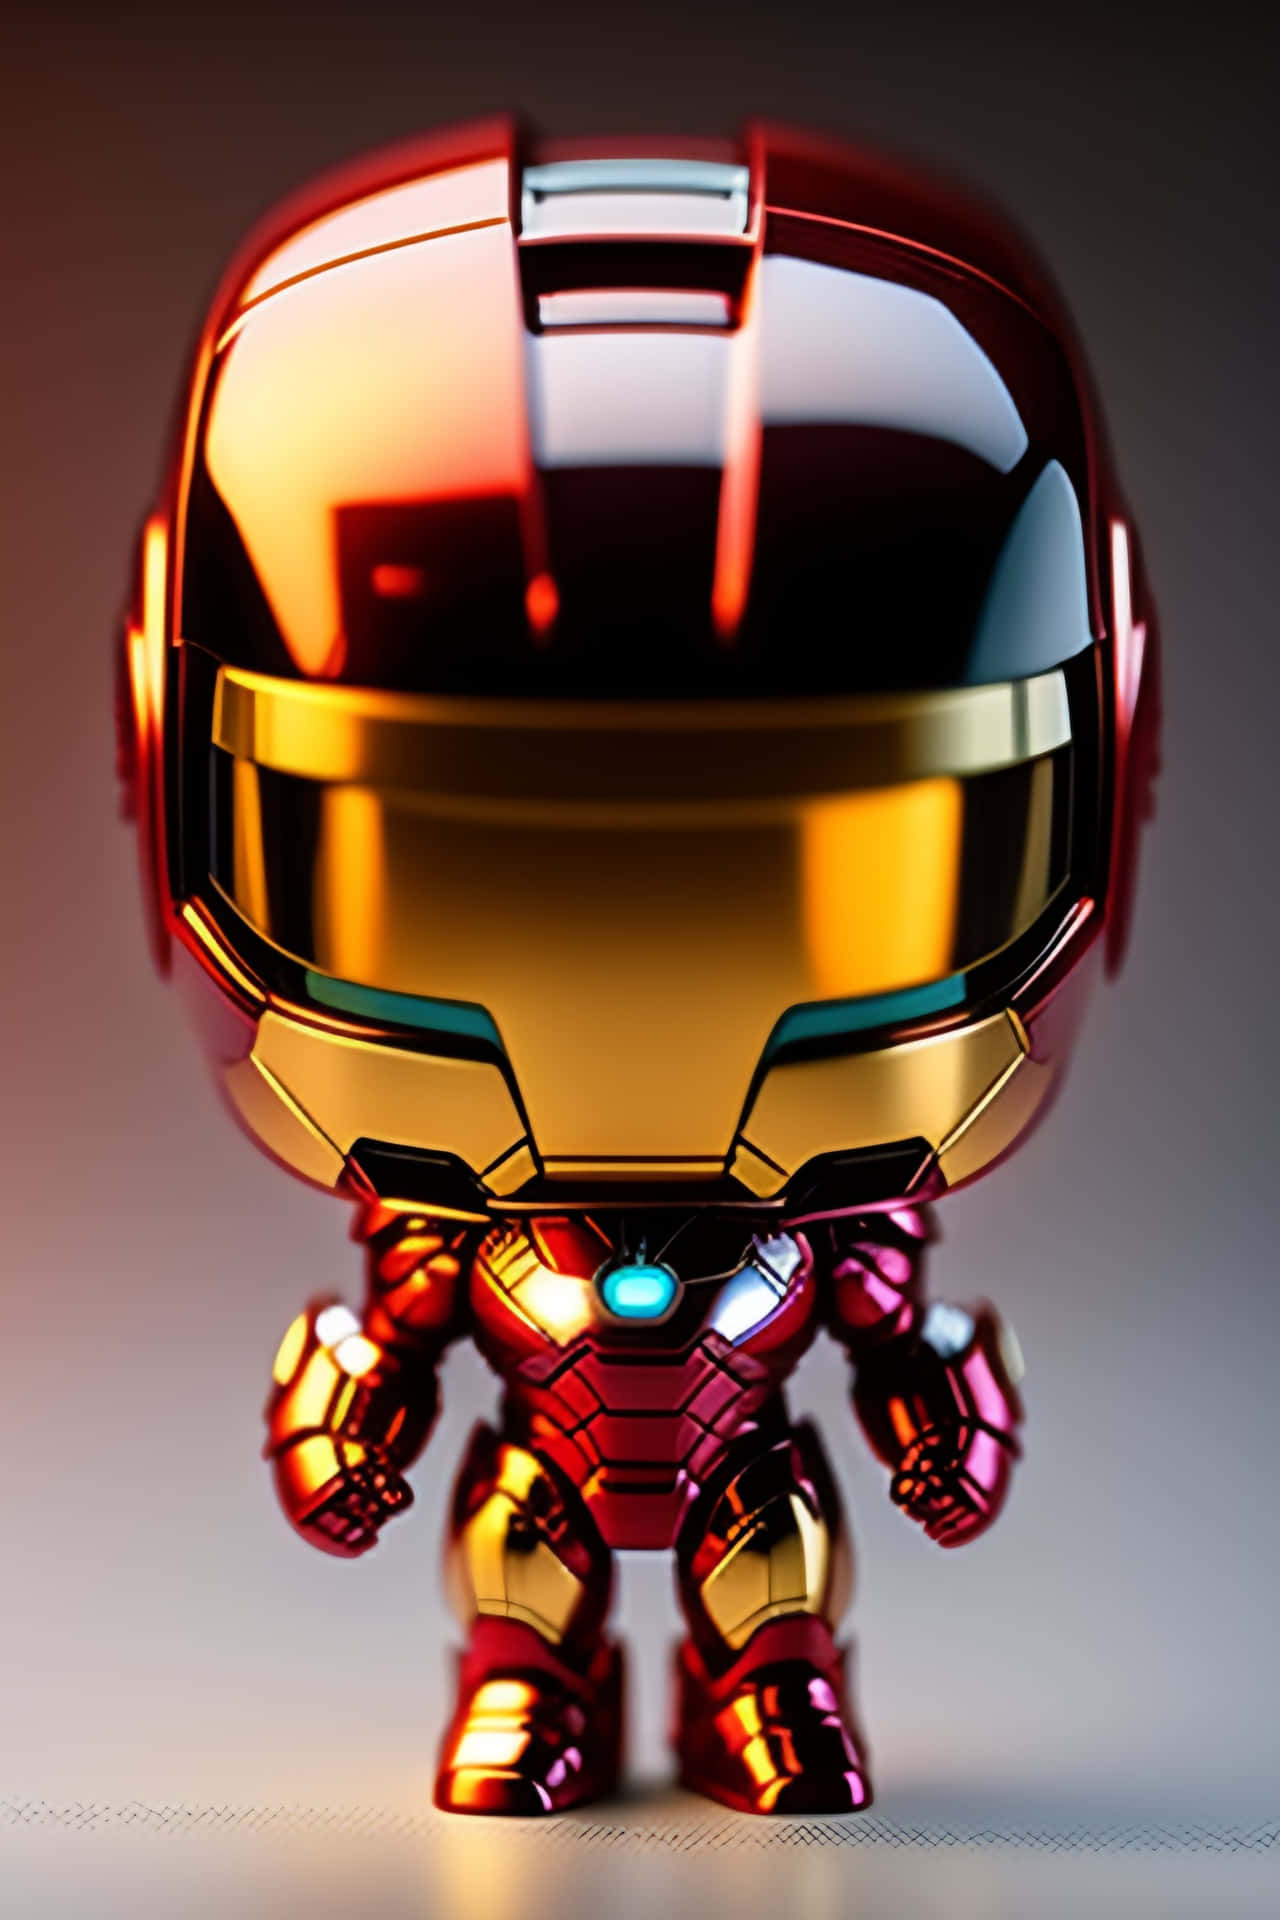 Collect All of Your Favorite Iron Man Pop Figures Wallpaper